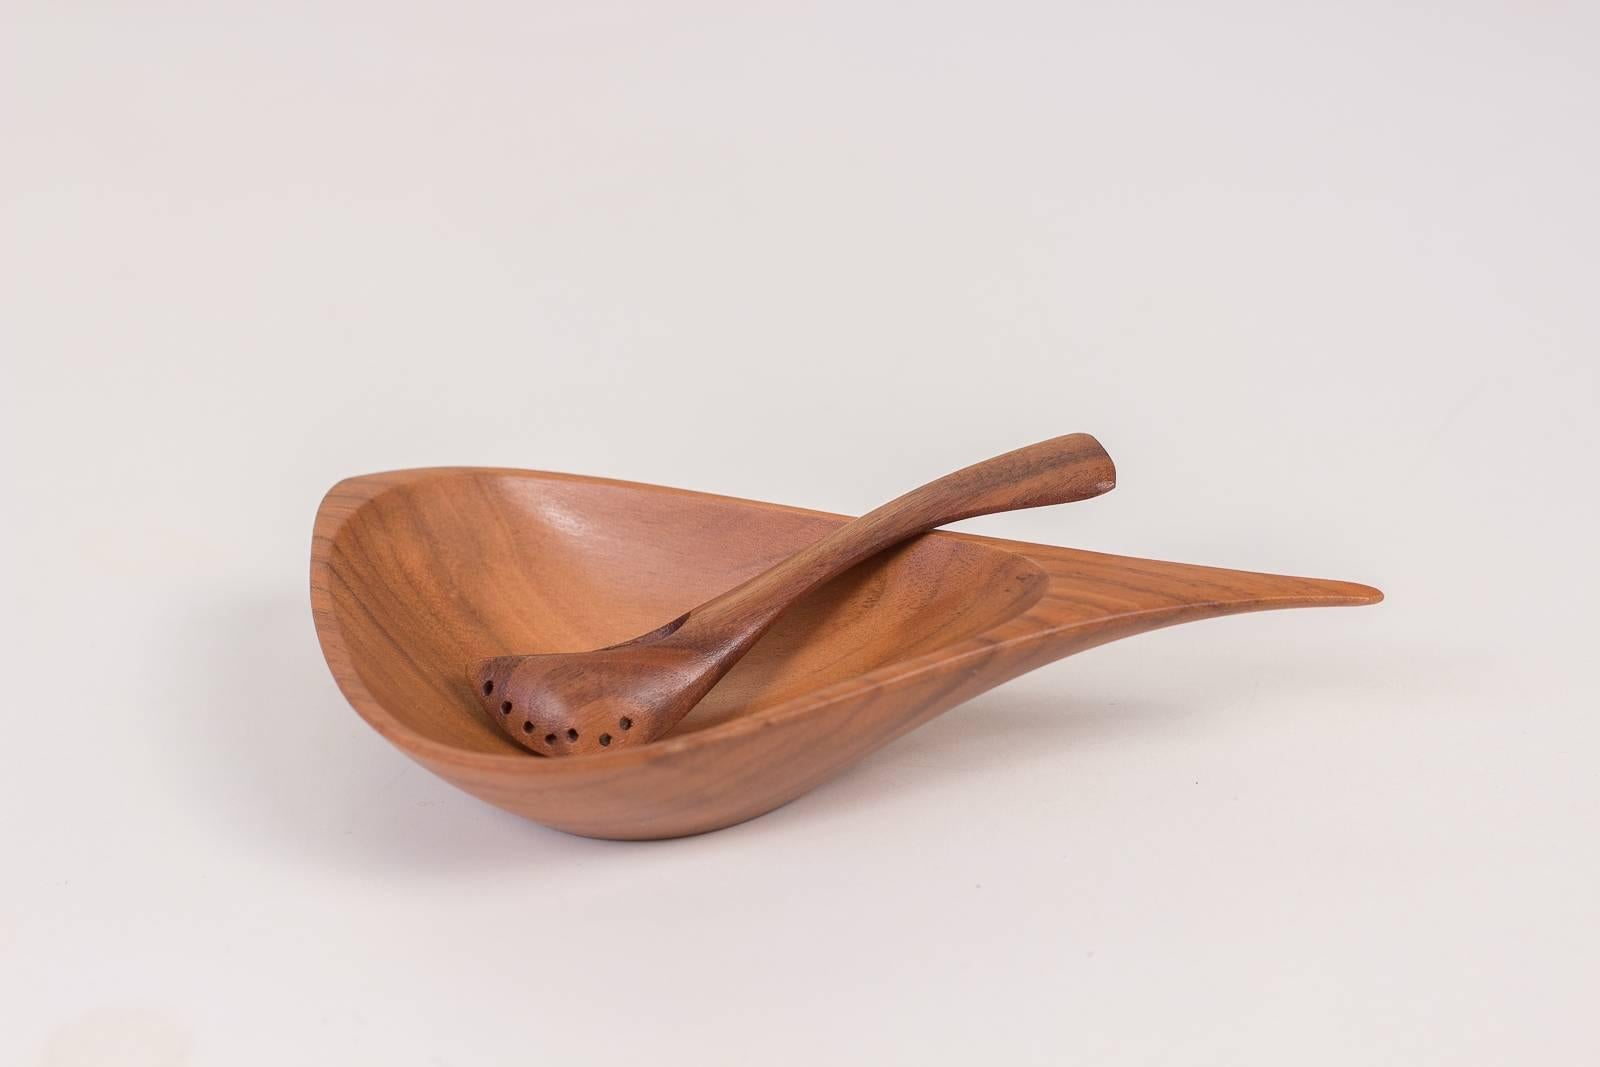 Diminutive, sculpted salt bowl and spoon carved from walnut by under-appreciated American teacher and woodworker, Emil Milan. Like his contemporaries Wharton Esherick and George Nakashima, Milan’s primary practice revolved around his finely crafted